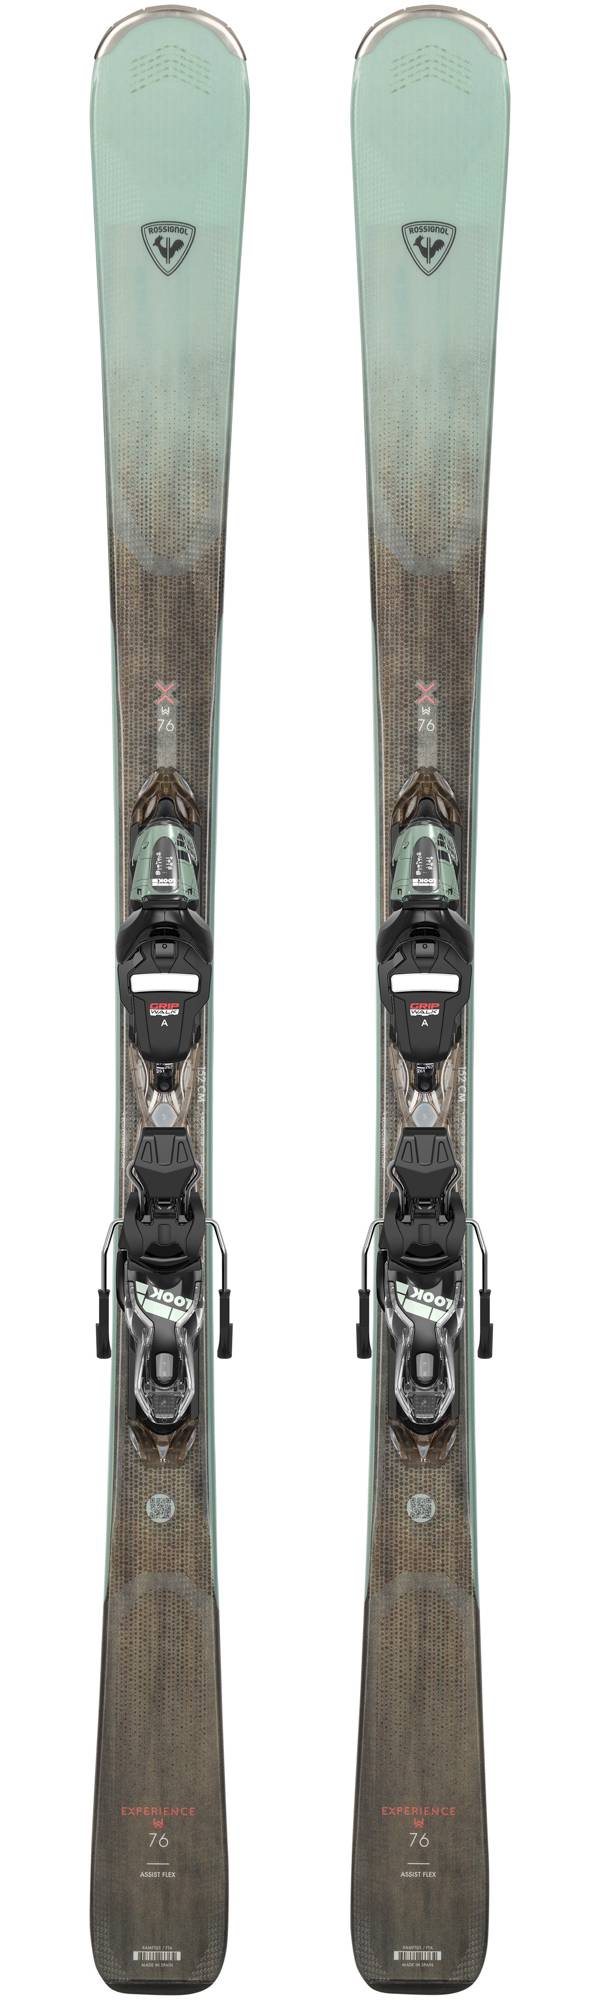 Rossignol '23-'24 Experience W 76 Women's Skis and XP10 Ski Binding Package product image